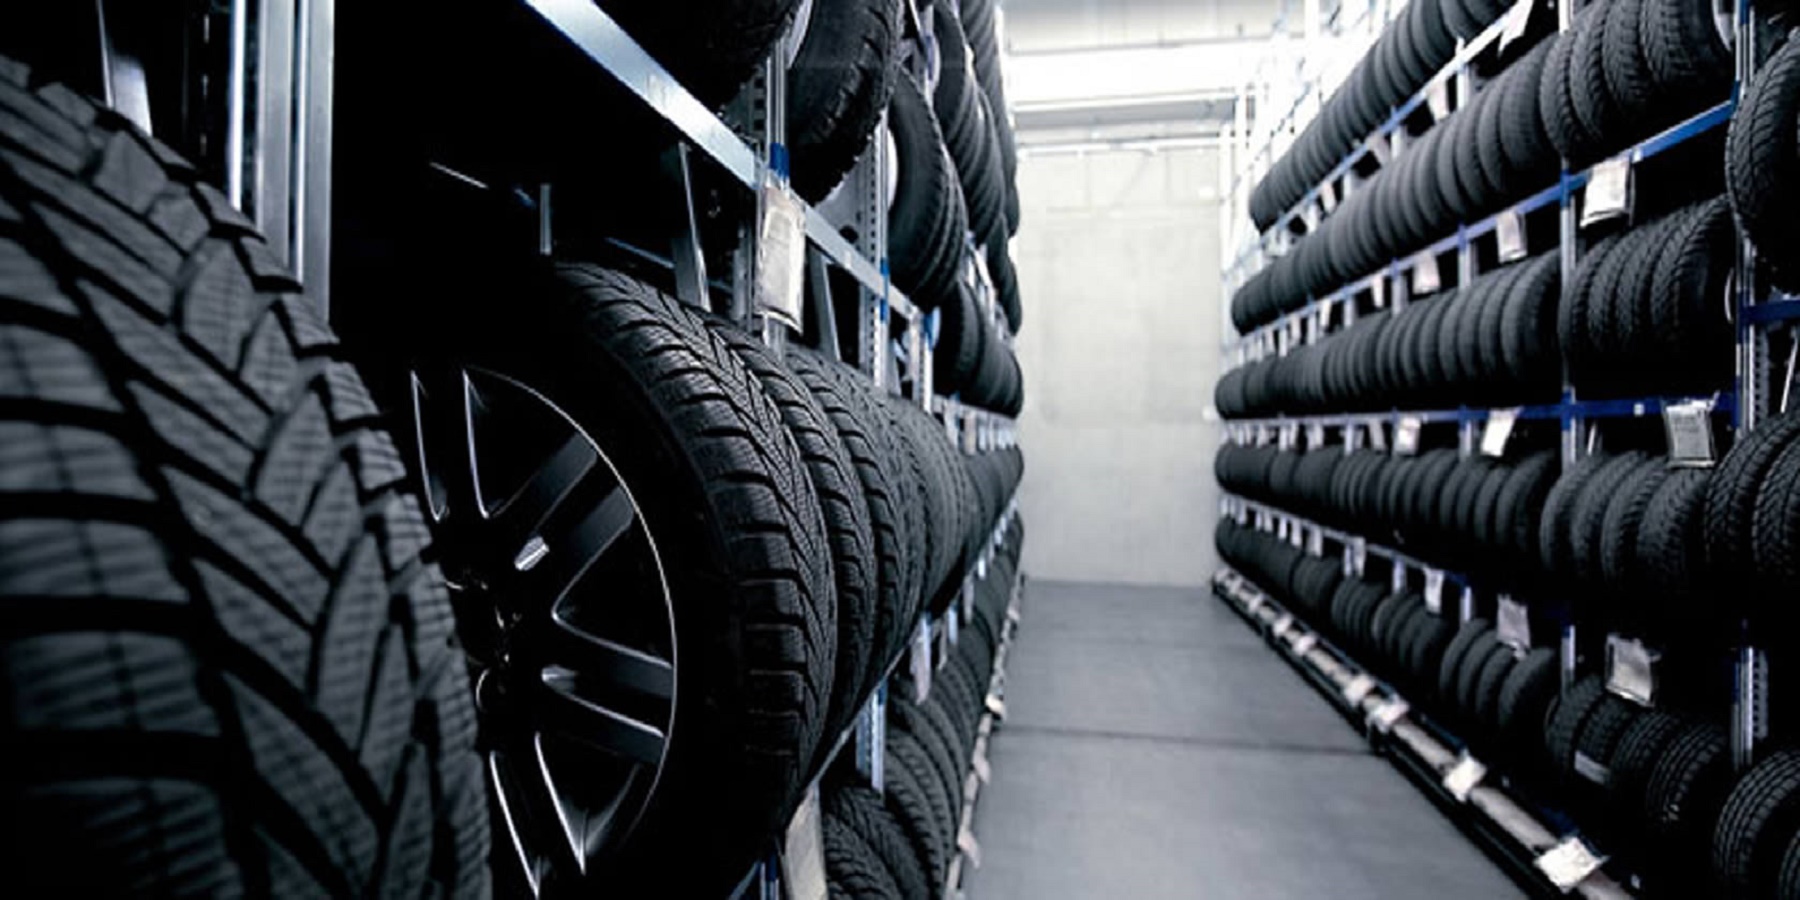 Know when Your Car Needs a Tyre Change